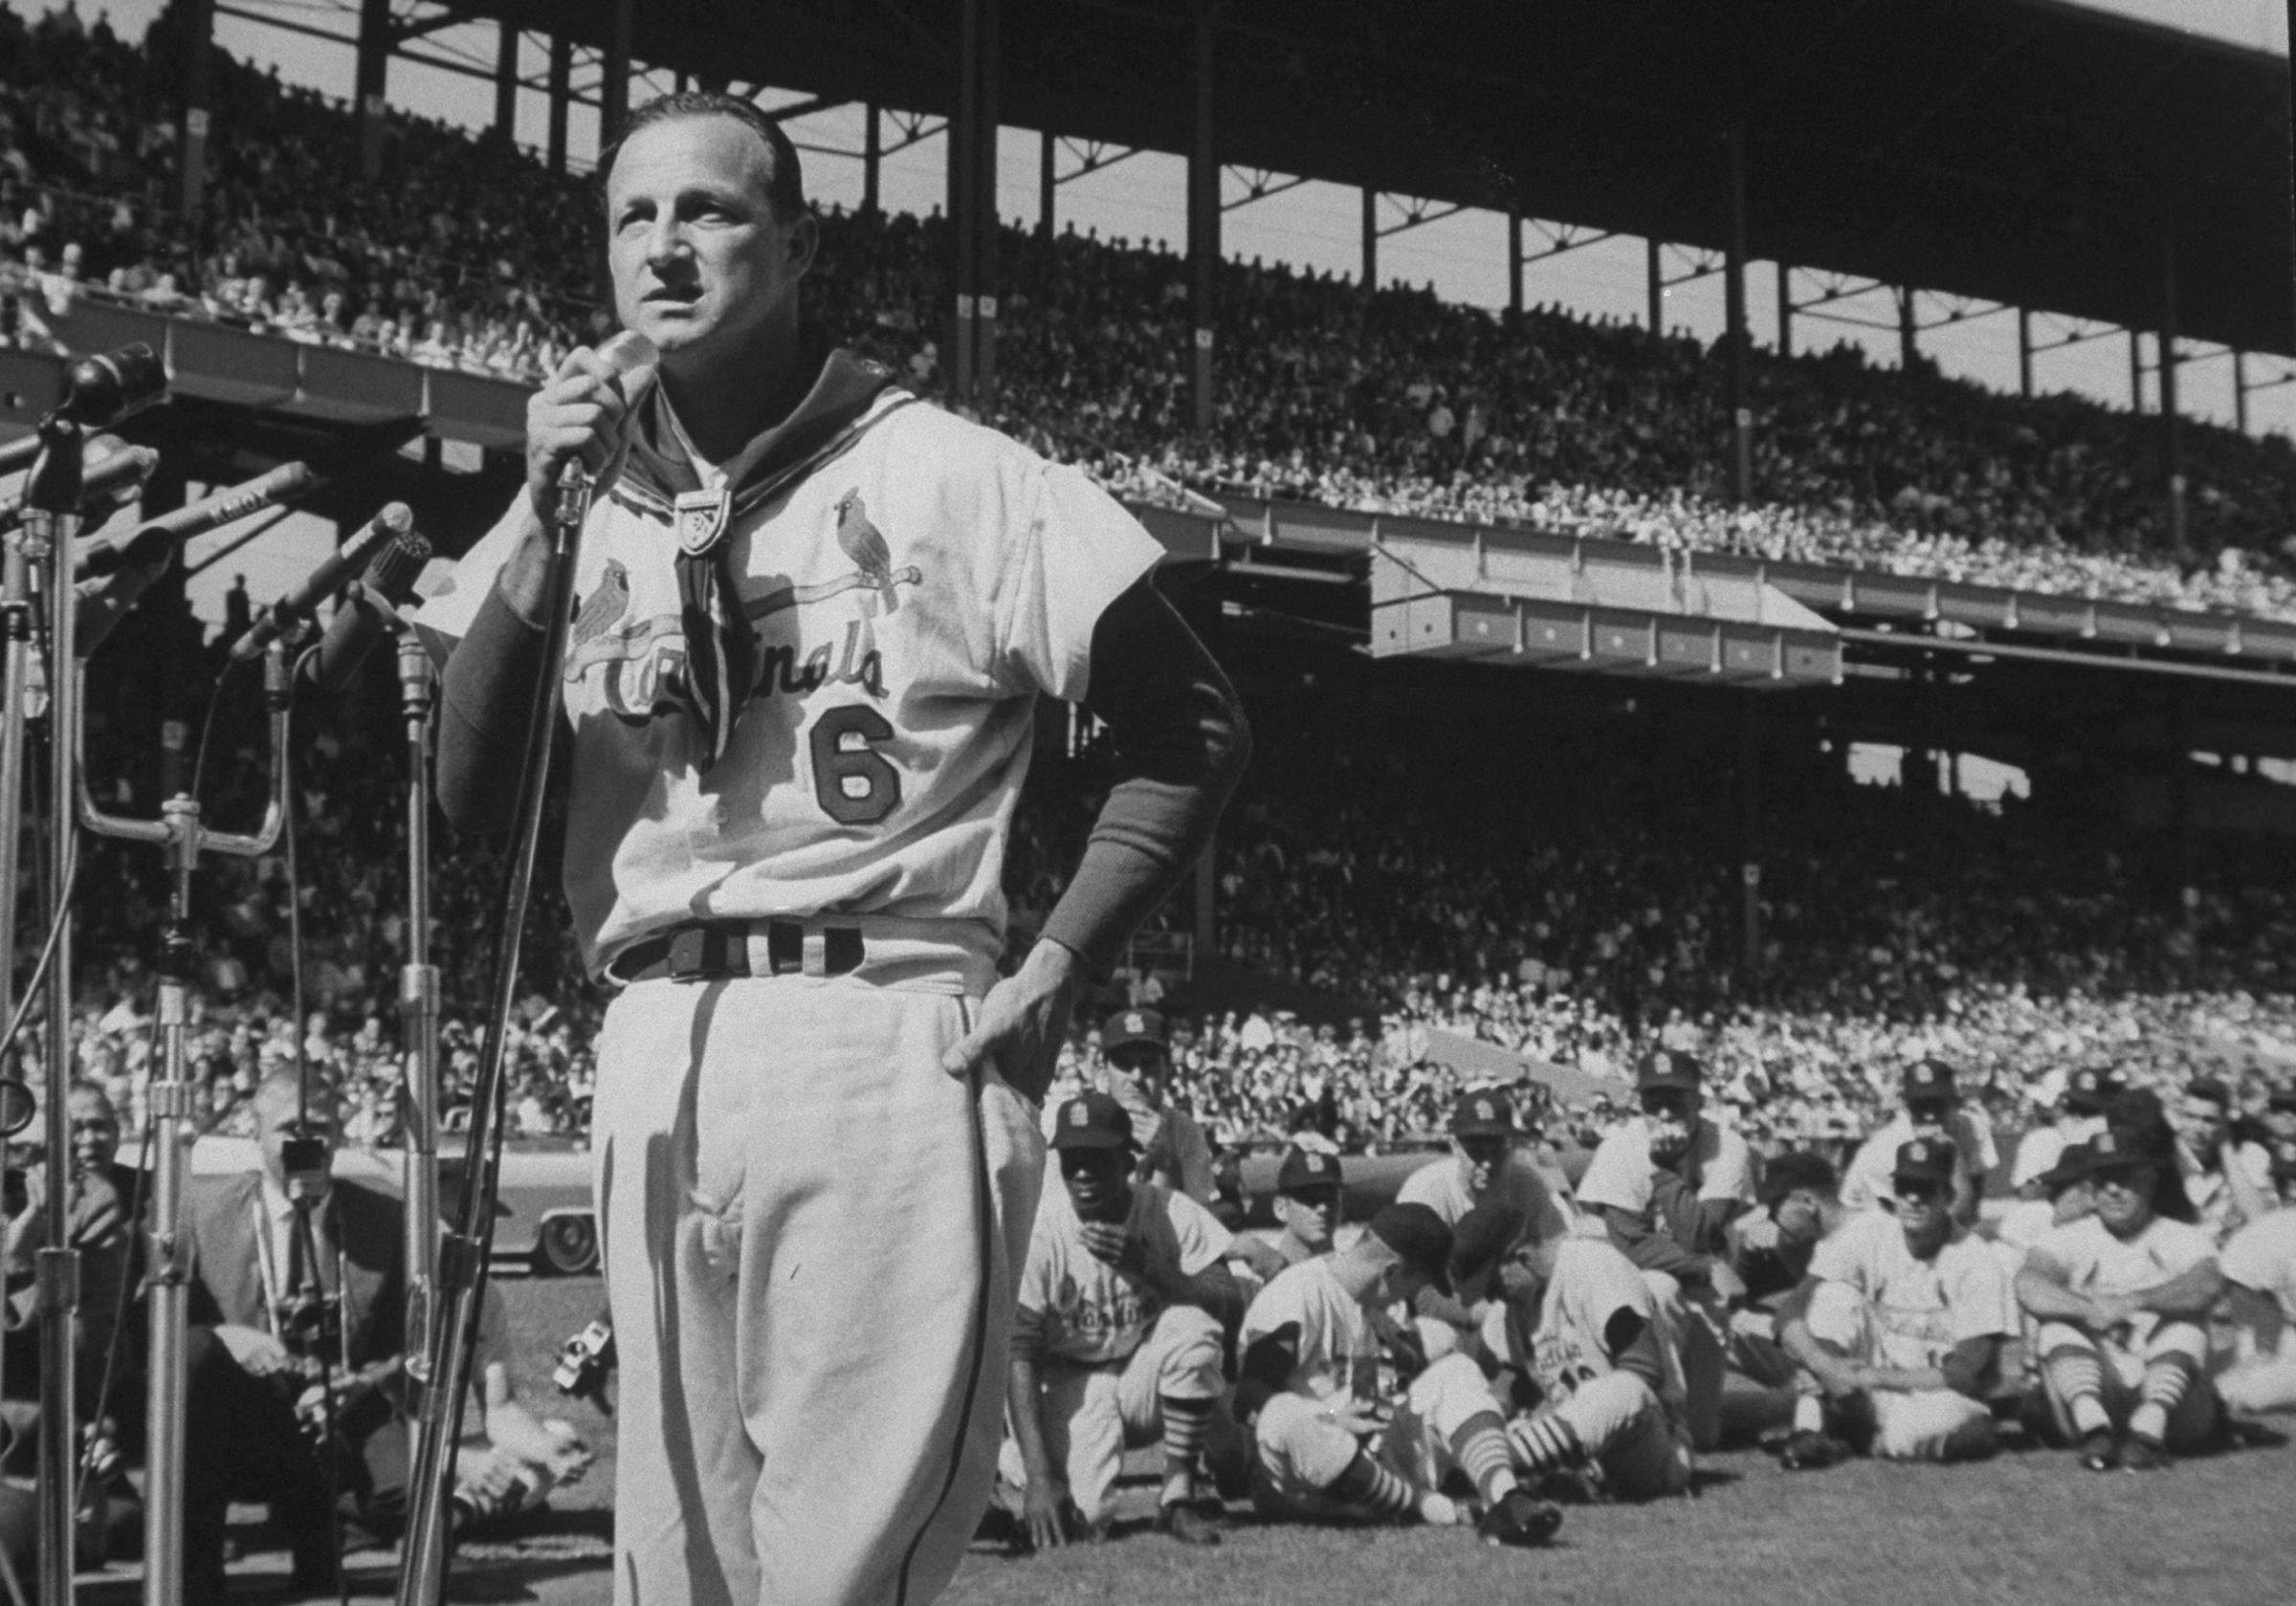 In front of tens of thousands of loyal Cardinals fans, his teammates and the Cincinnati Reds, Stan Musial says goodbye to baseball in September, 1963, after 22 years in a St. Louis uniform.